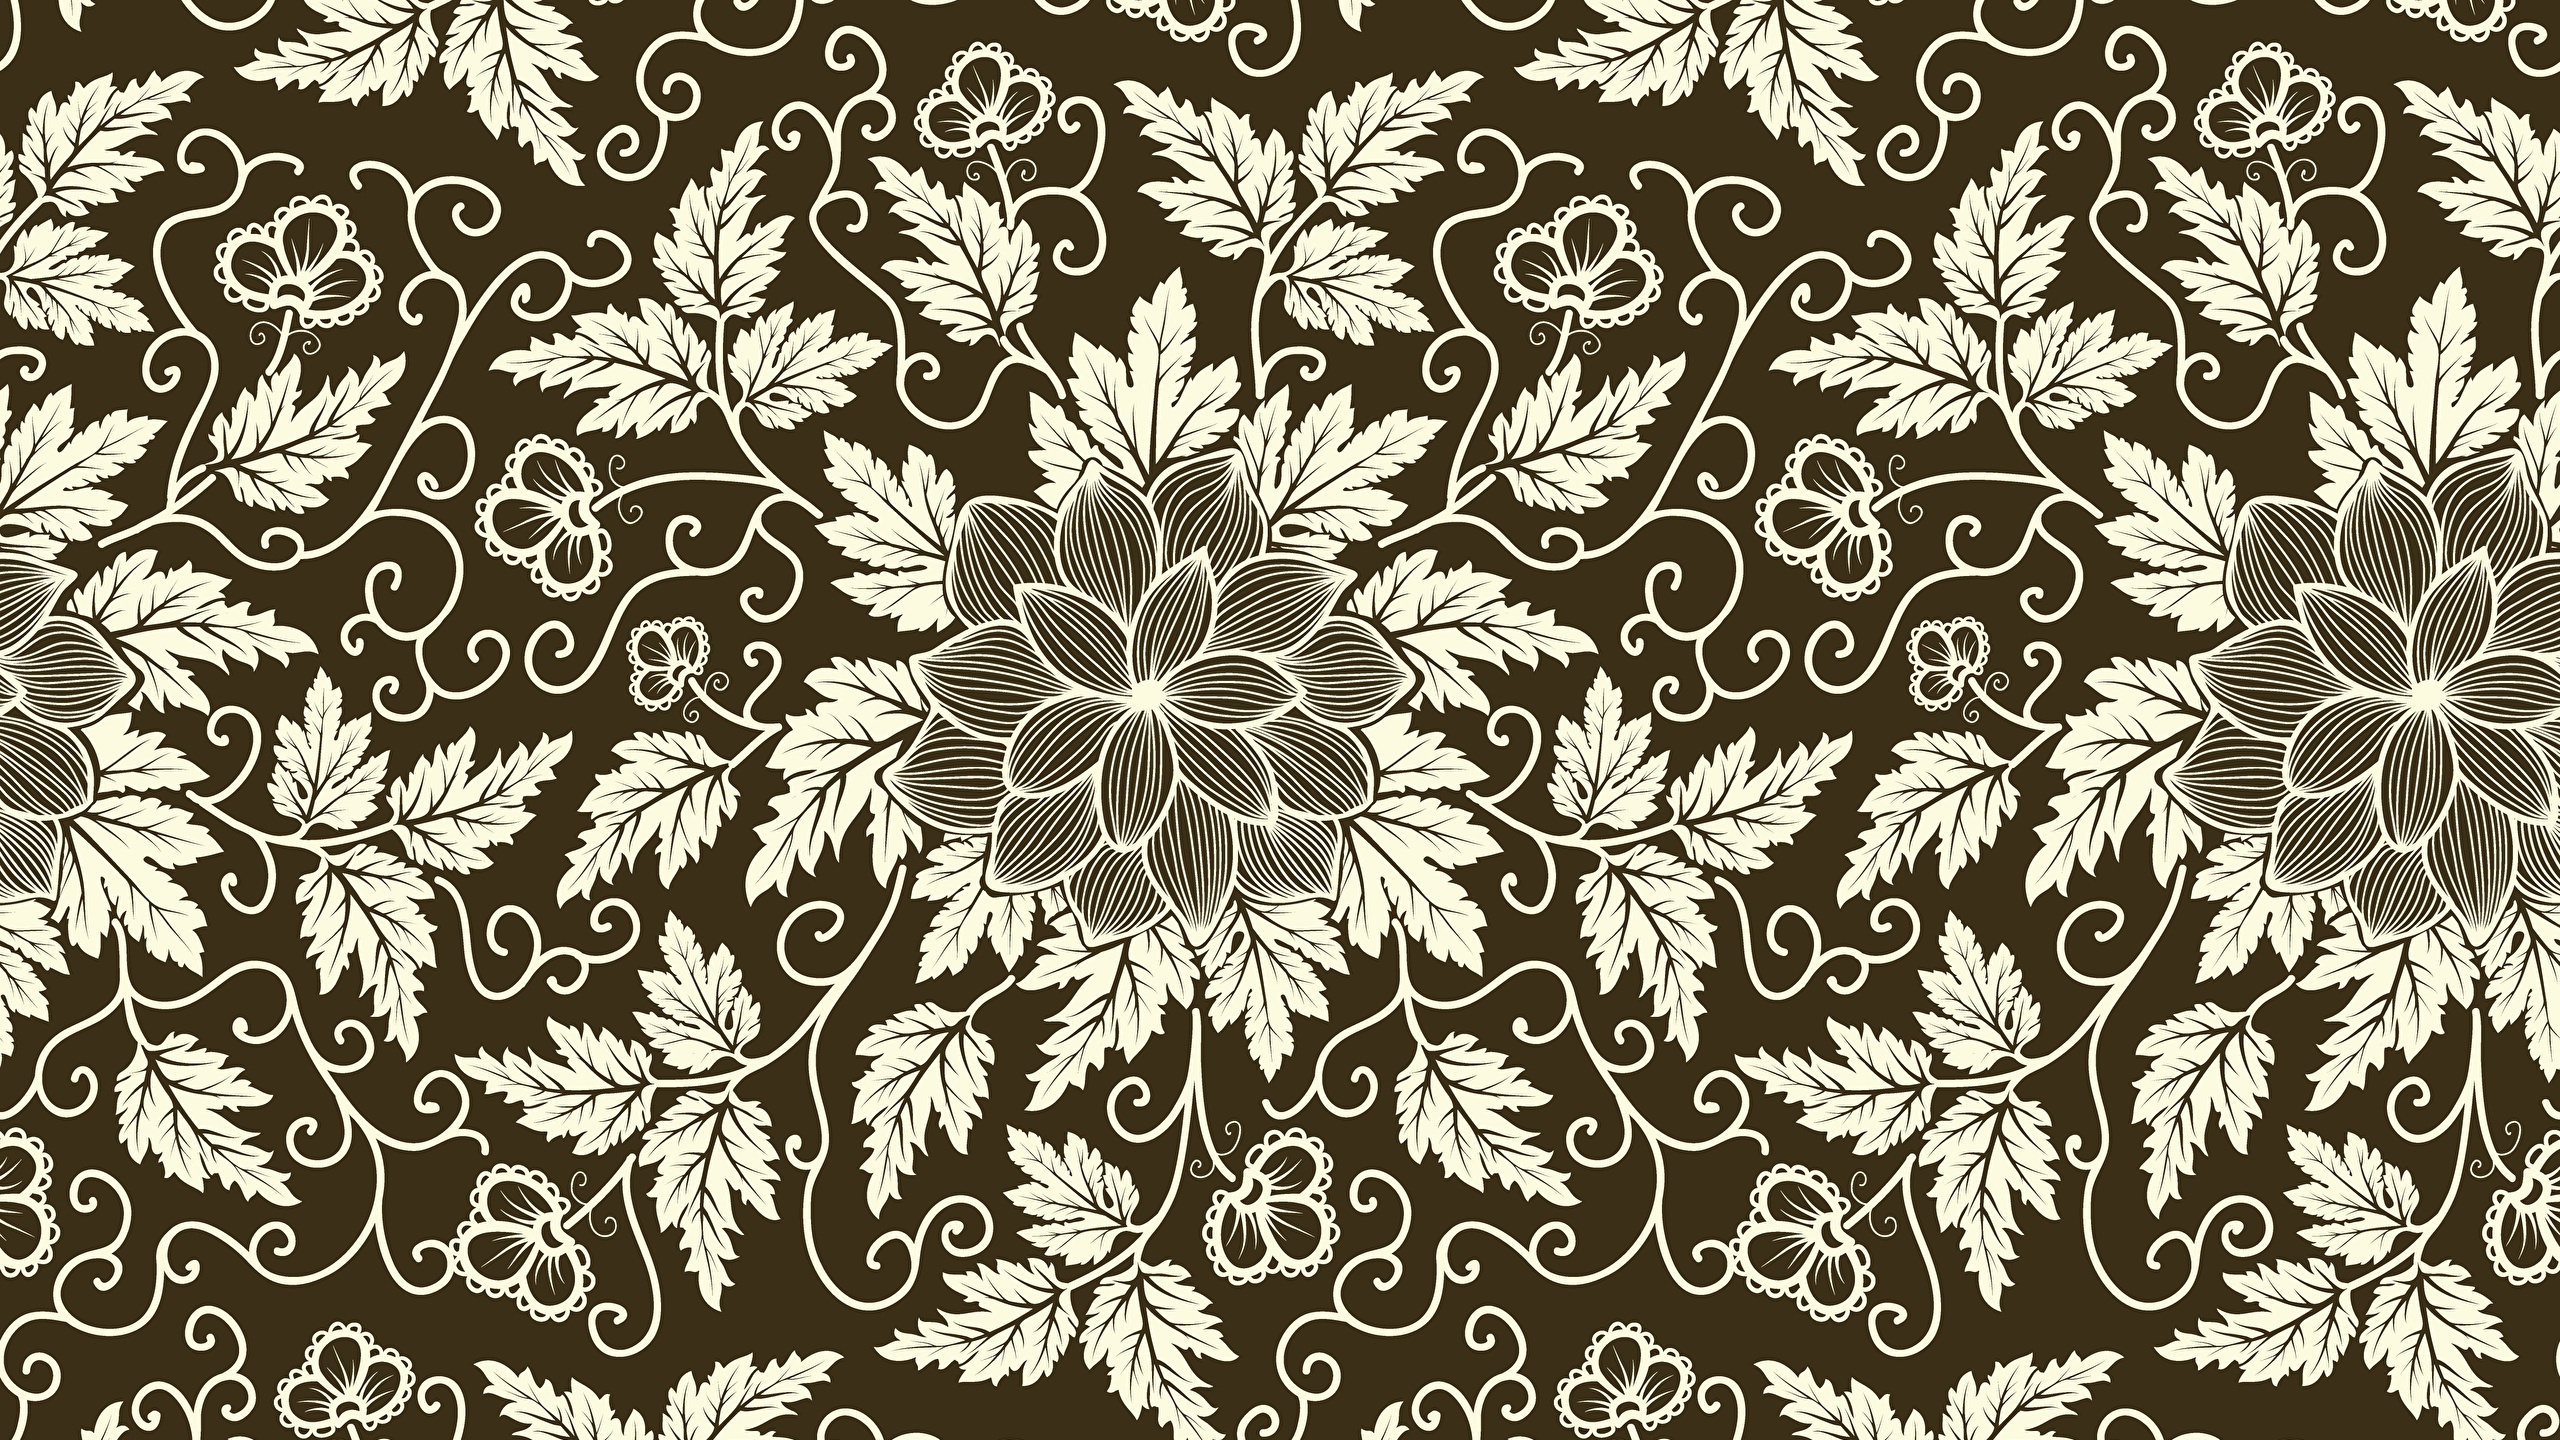 Black and White Floral Textile. Wallpaper in 2560x1440 Resolution